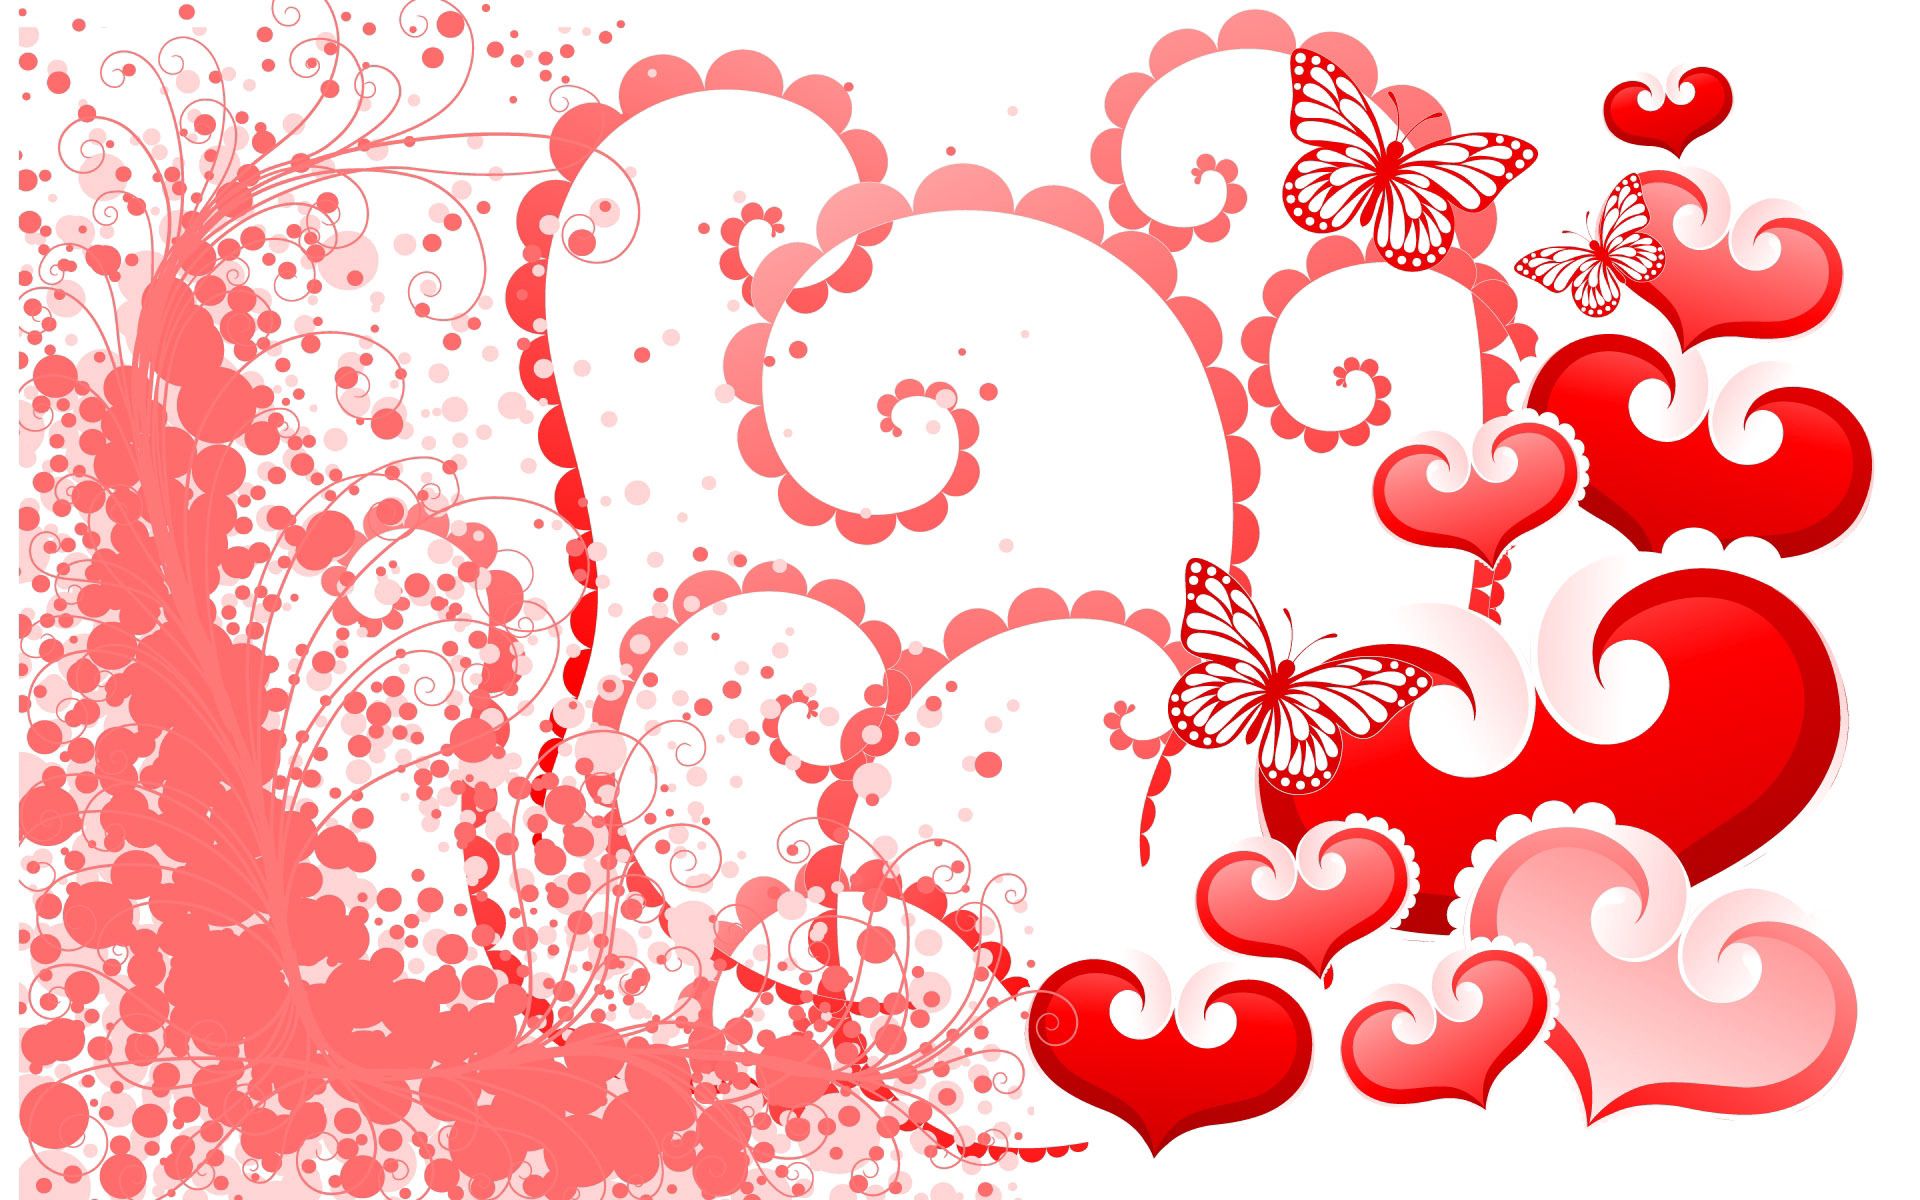 butterflies, holidays, background, hearts, valentine's day 1080p